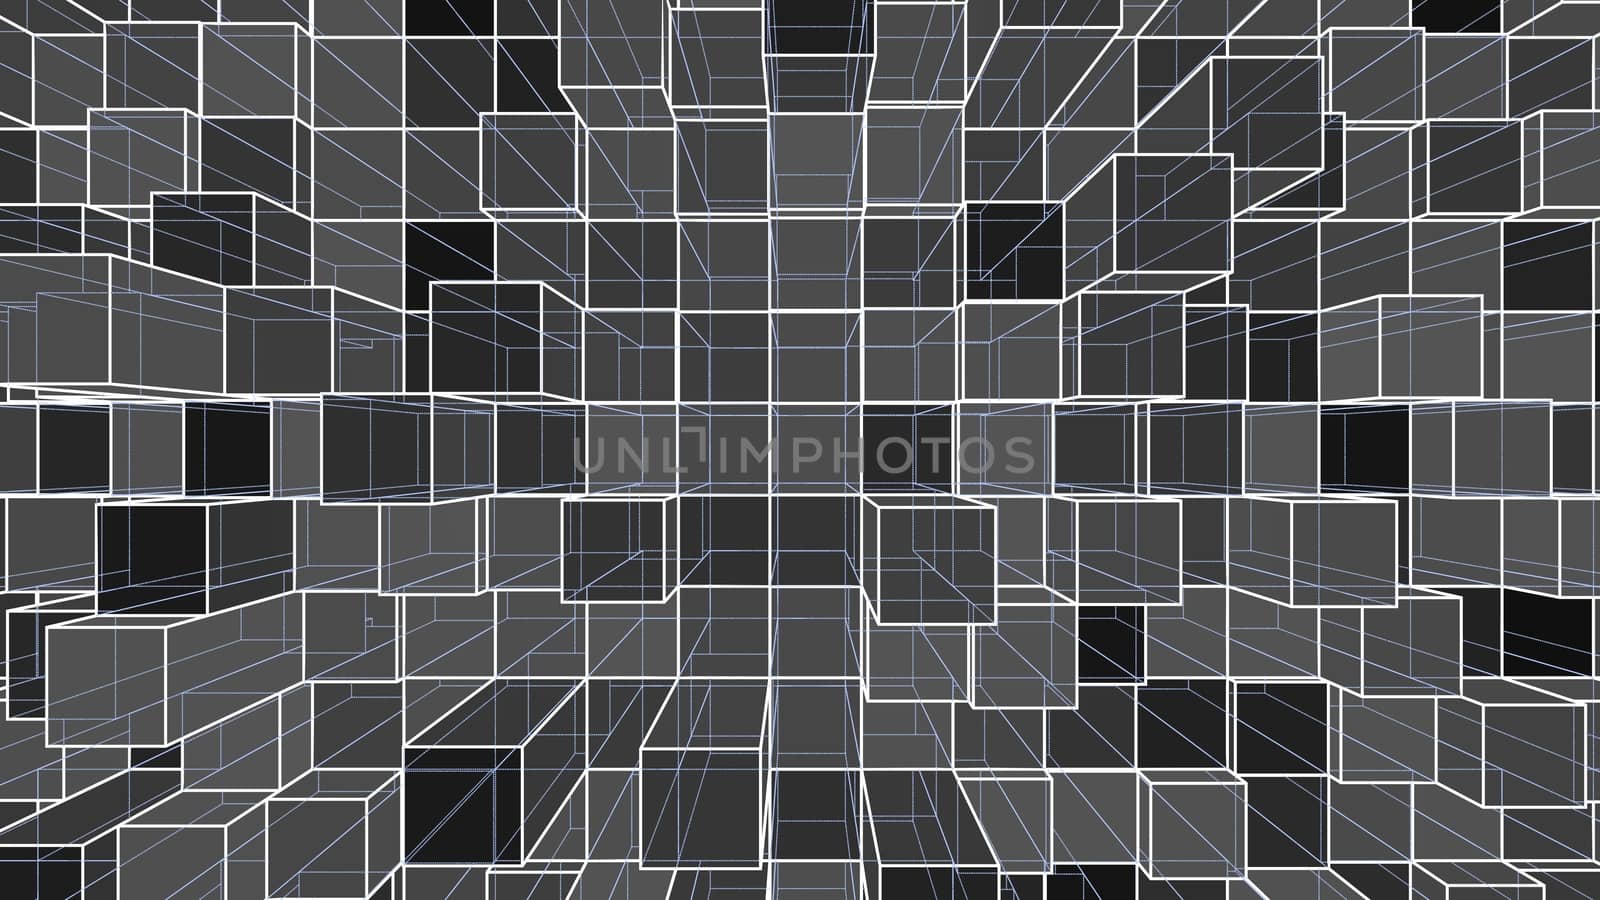 Abstract background of colorful outline cubes. 3D illustration. Wire-frame style.